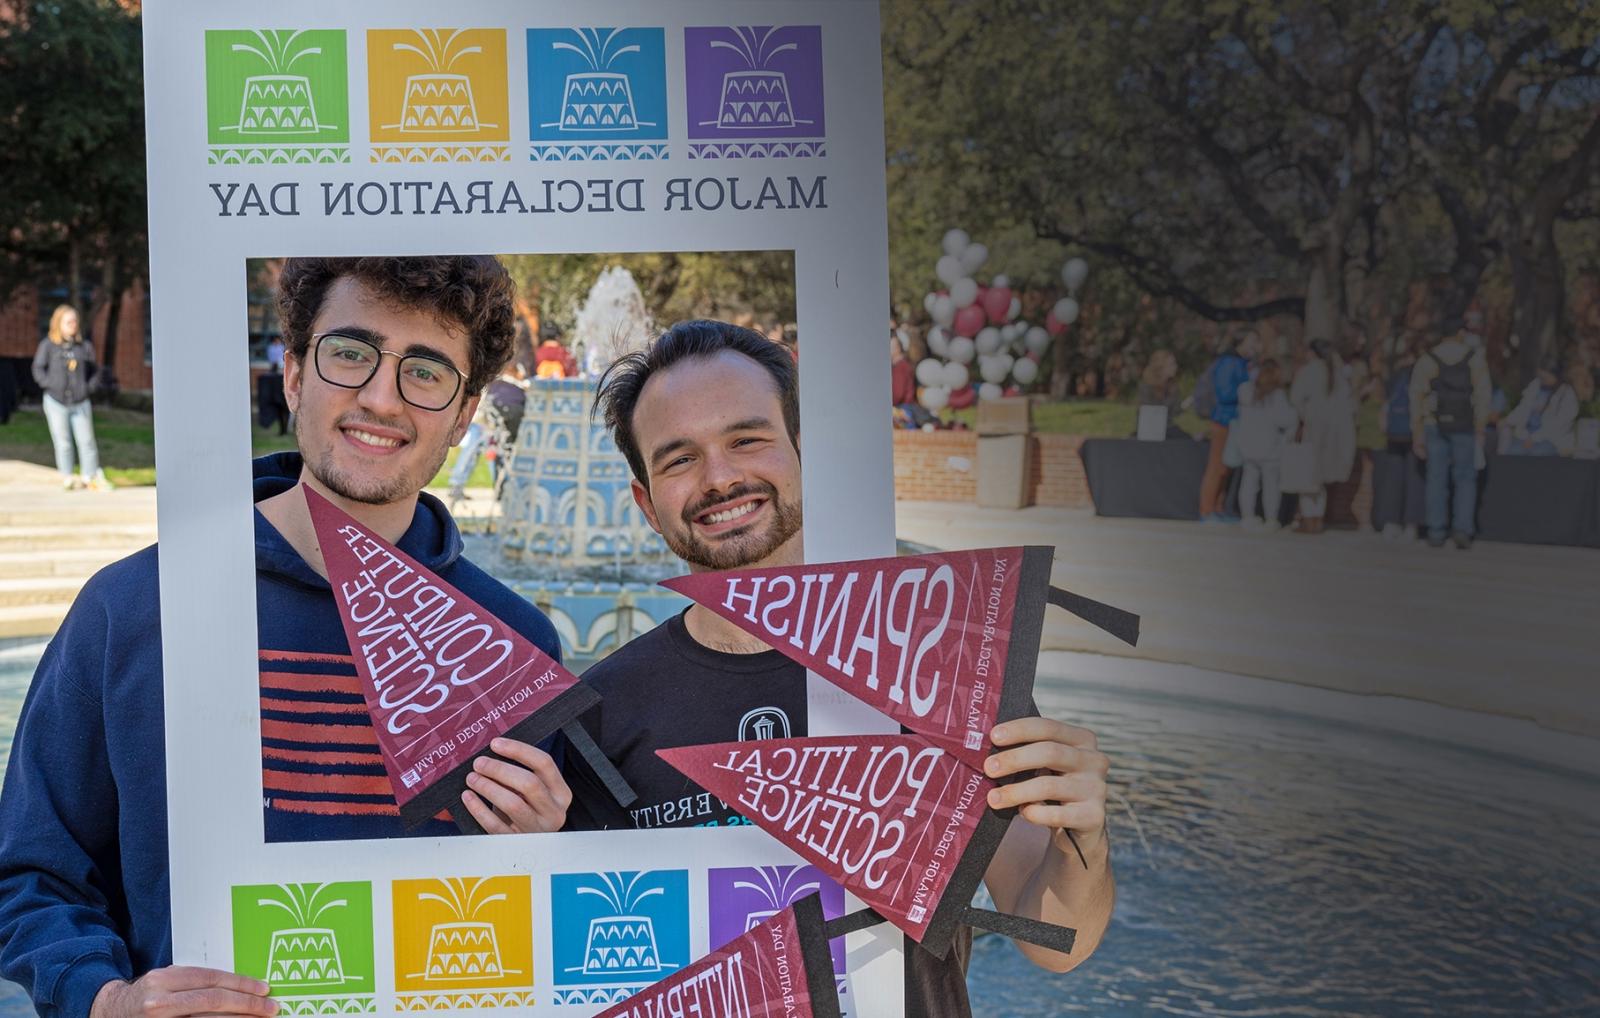 Blaine Martin and Caleb Aguiar pose in front of the fountain with a Major Declaration Day frame